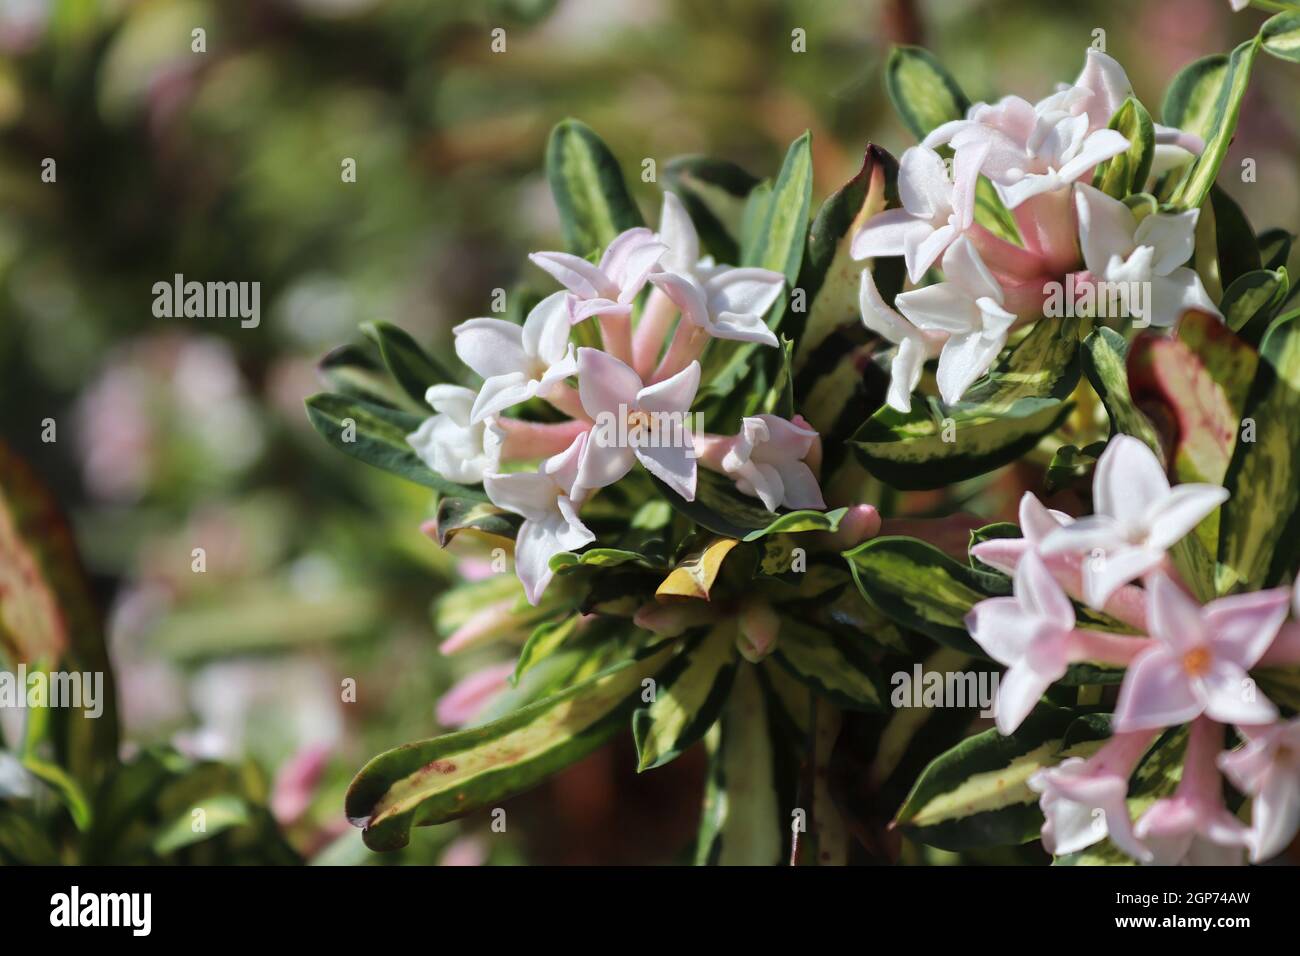 Clusters of daphne burkwoodii flower in full bloom. Stock Photo